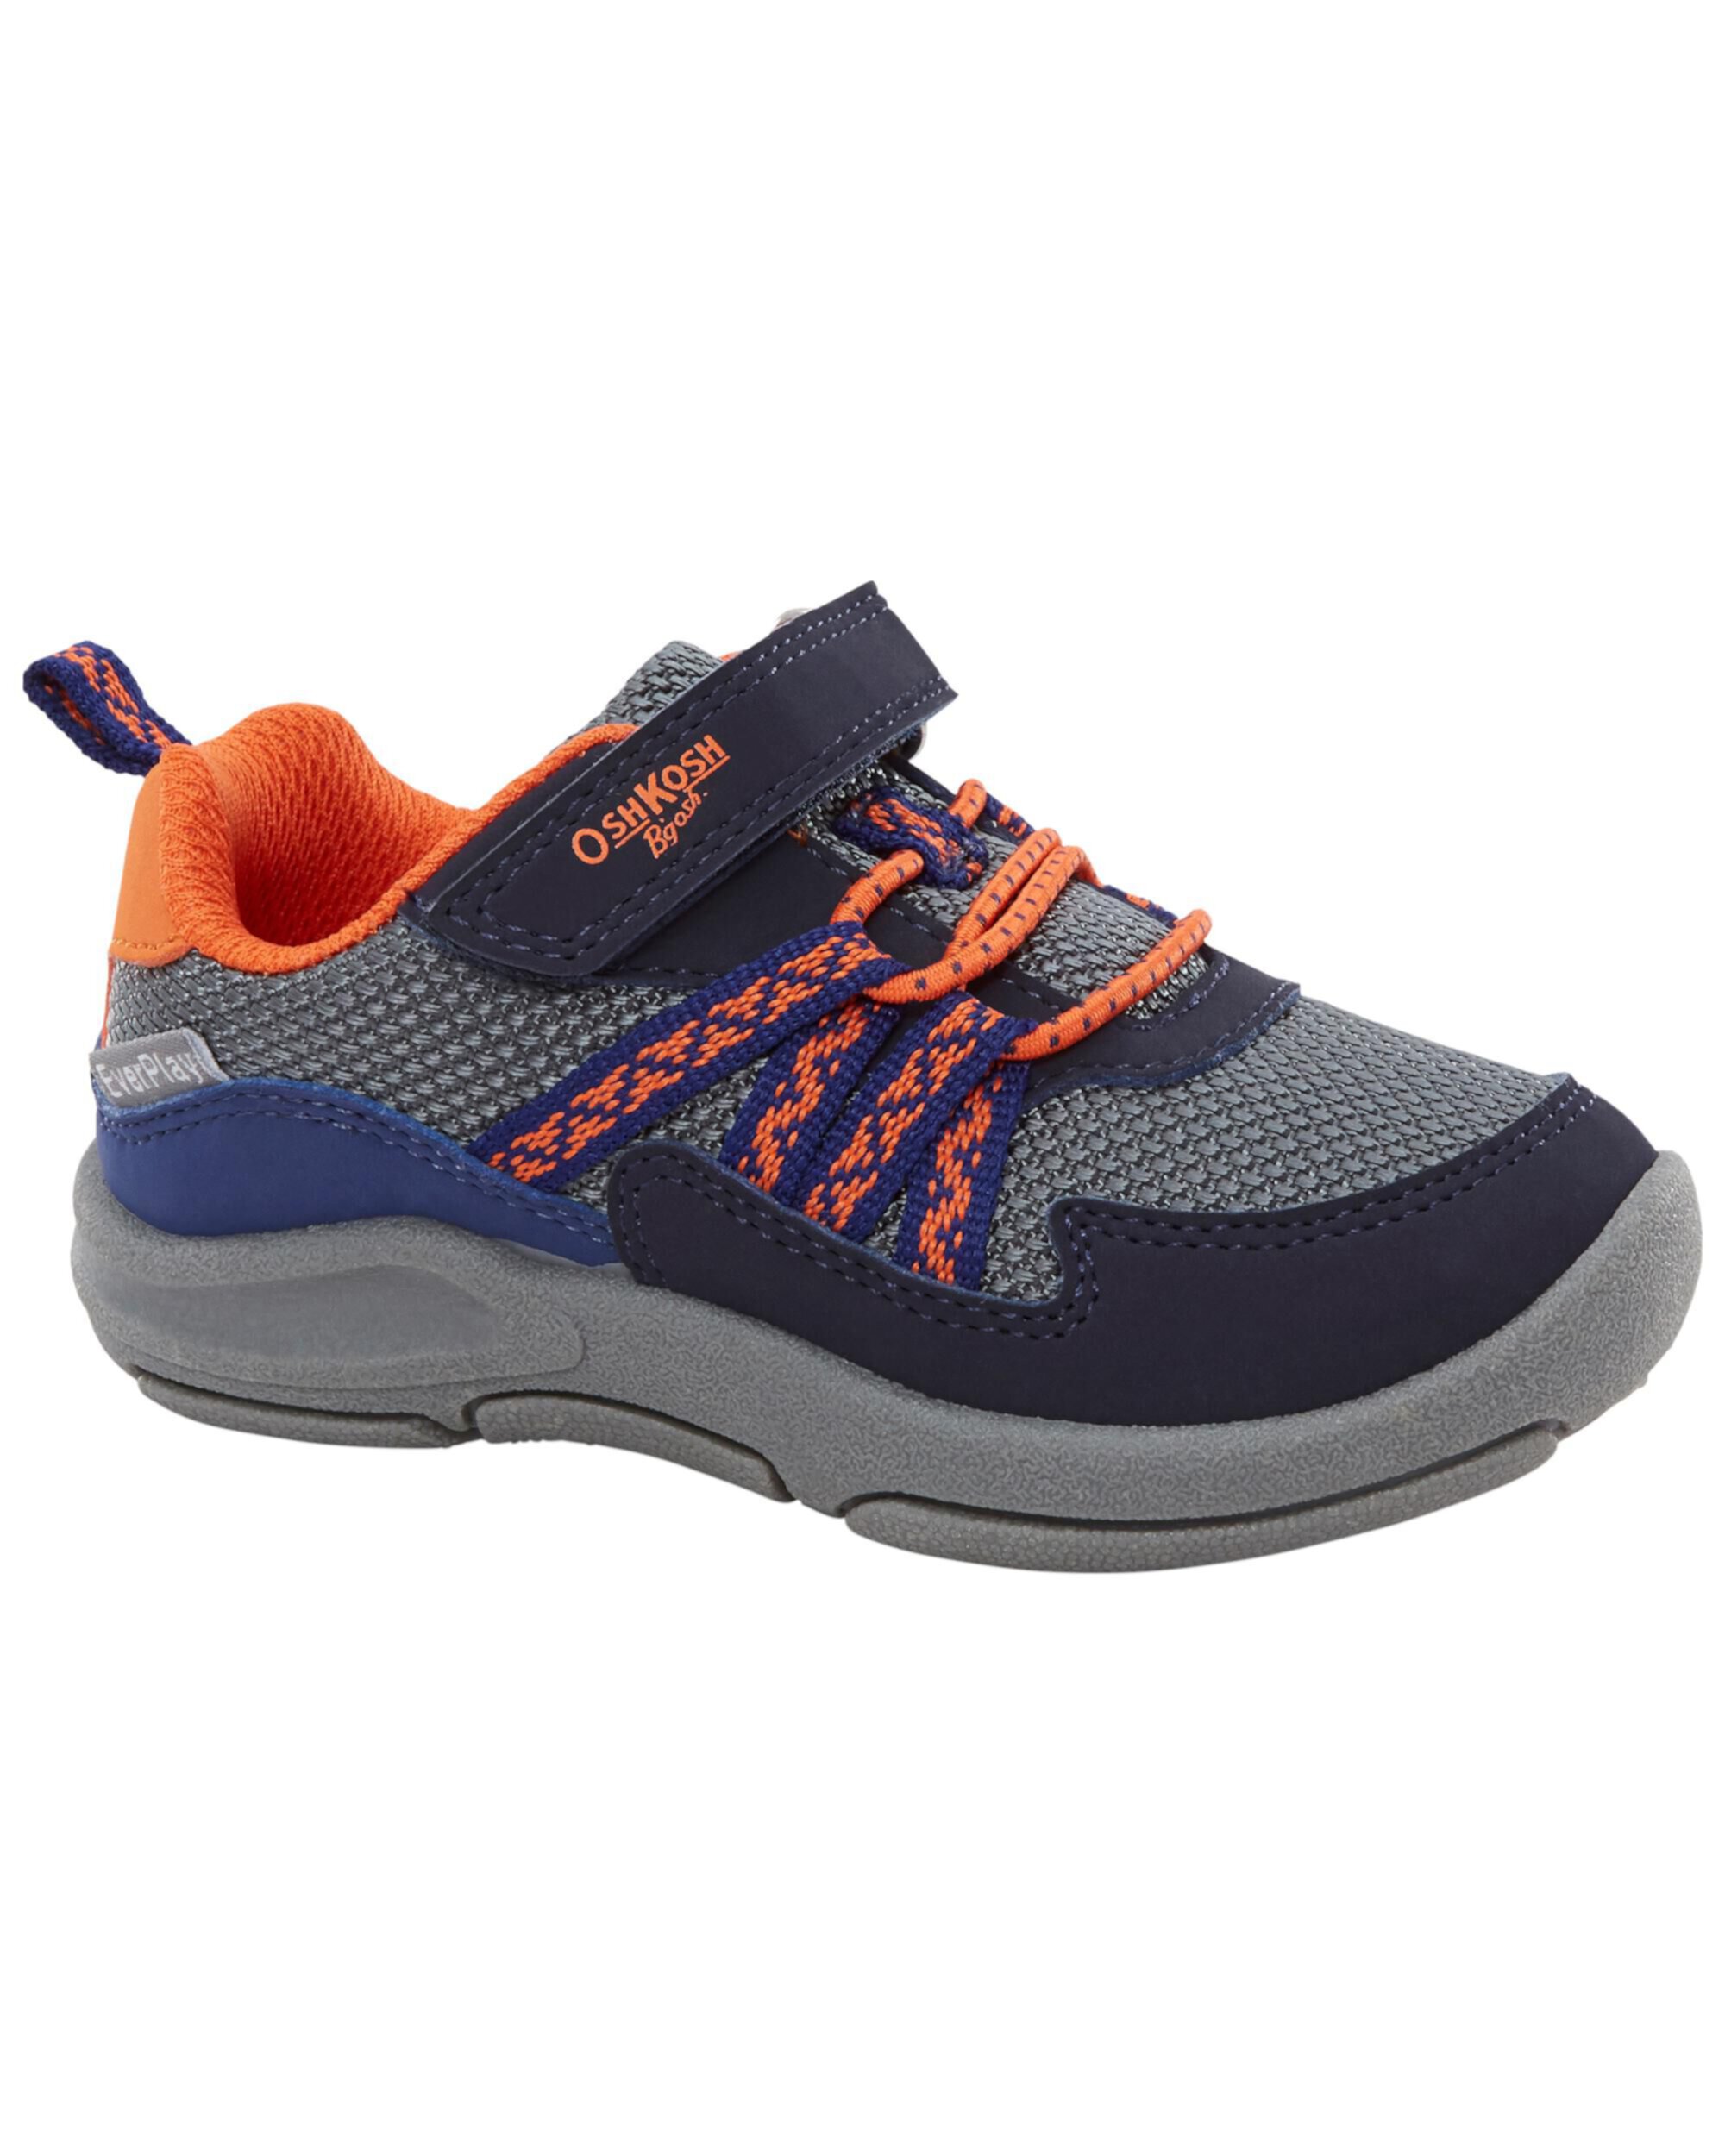 Toddler EverPlay Rugged Sneakers Carter's